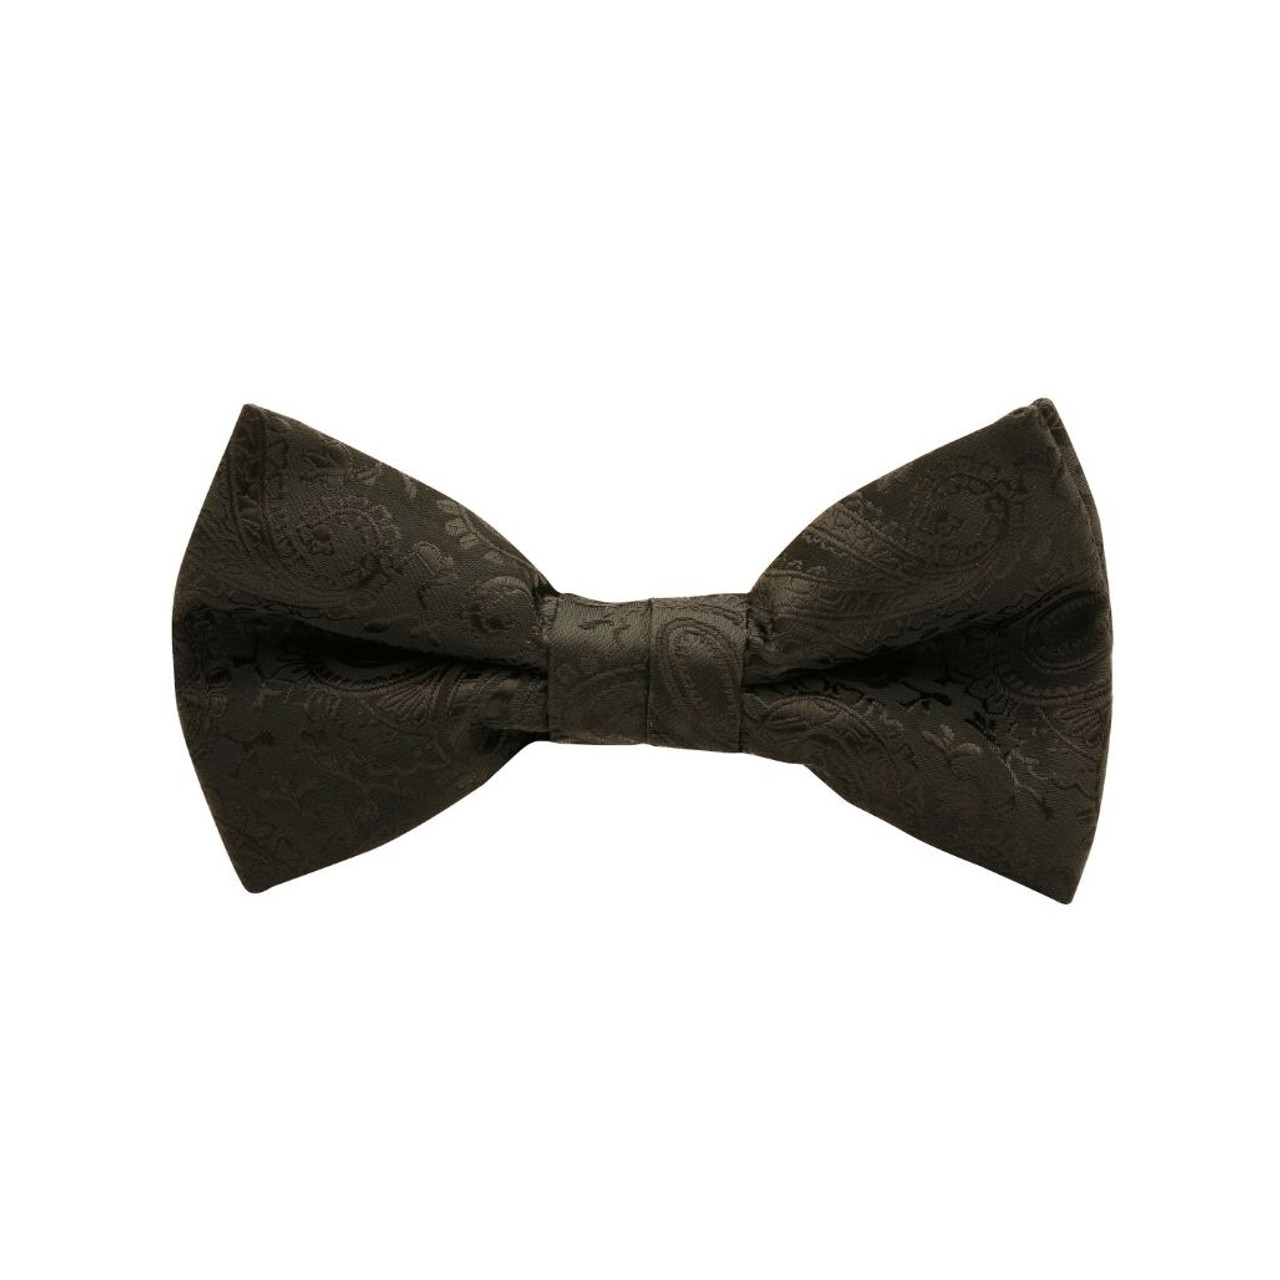 BOW TIE + POCKET SQUARE SET. Paisley. Black/White. Supplied with a white pocket square.